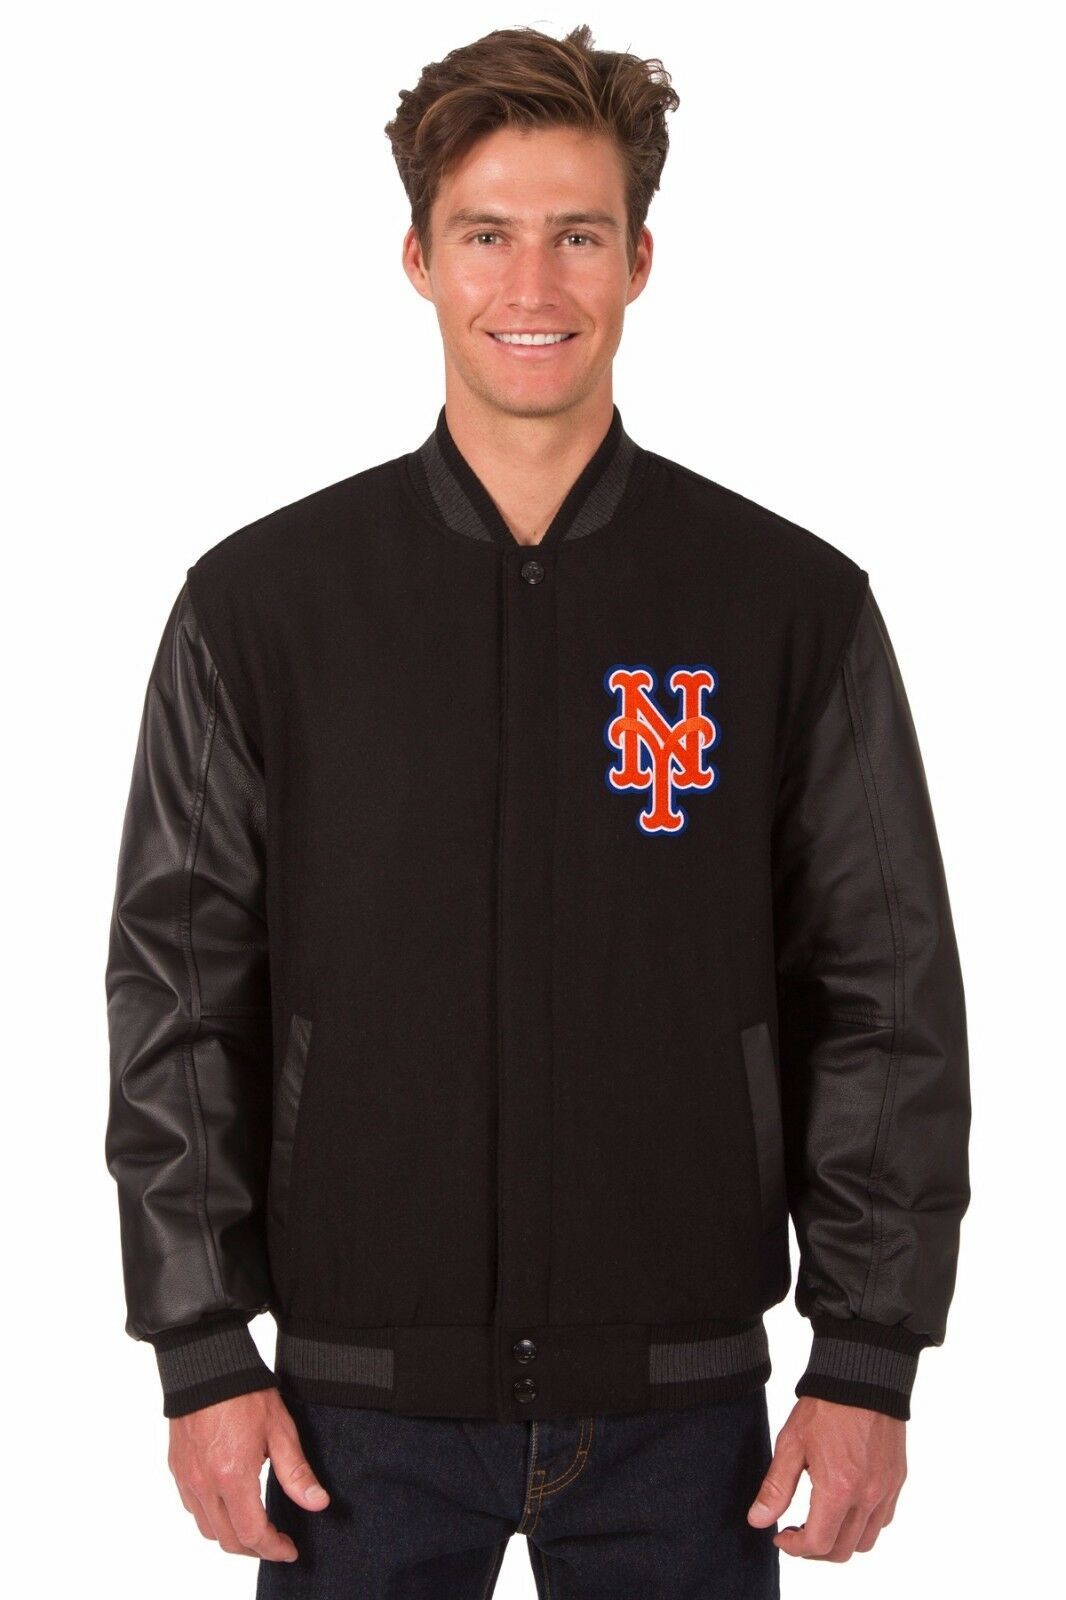 Primary image for MLB New York Mets Wool & Leather Reversible Jacket with Embroidered Logos Black